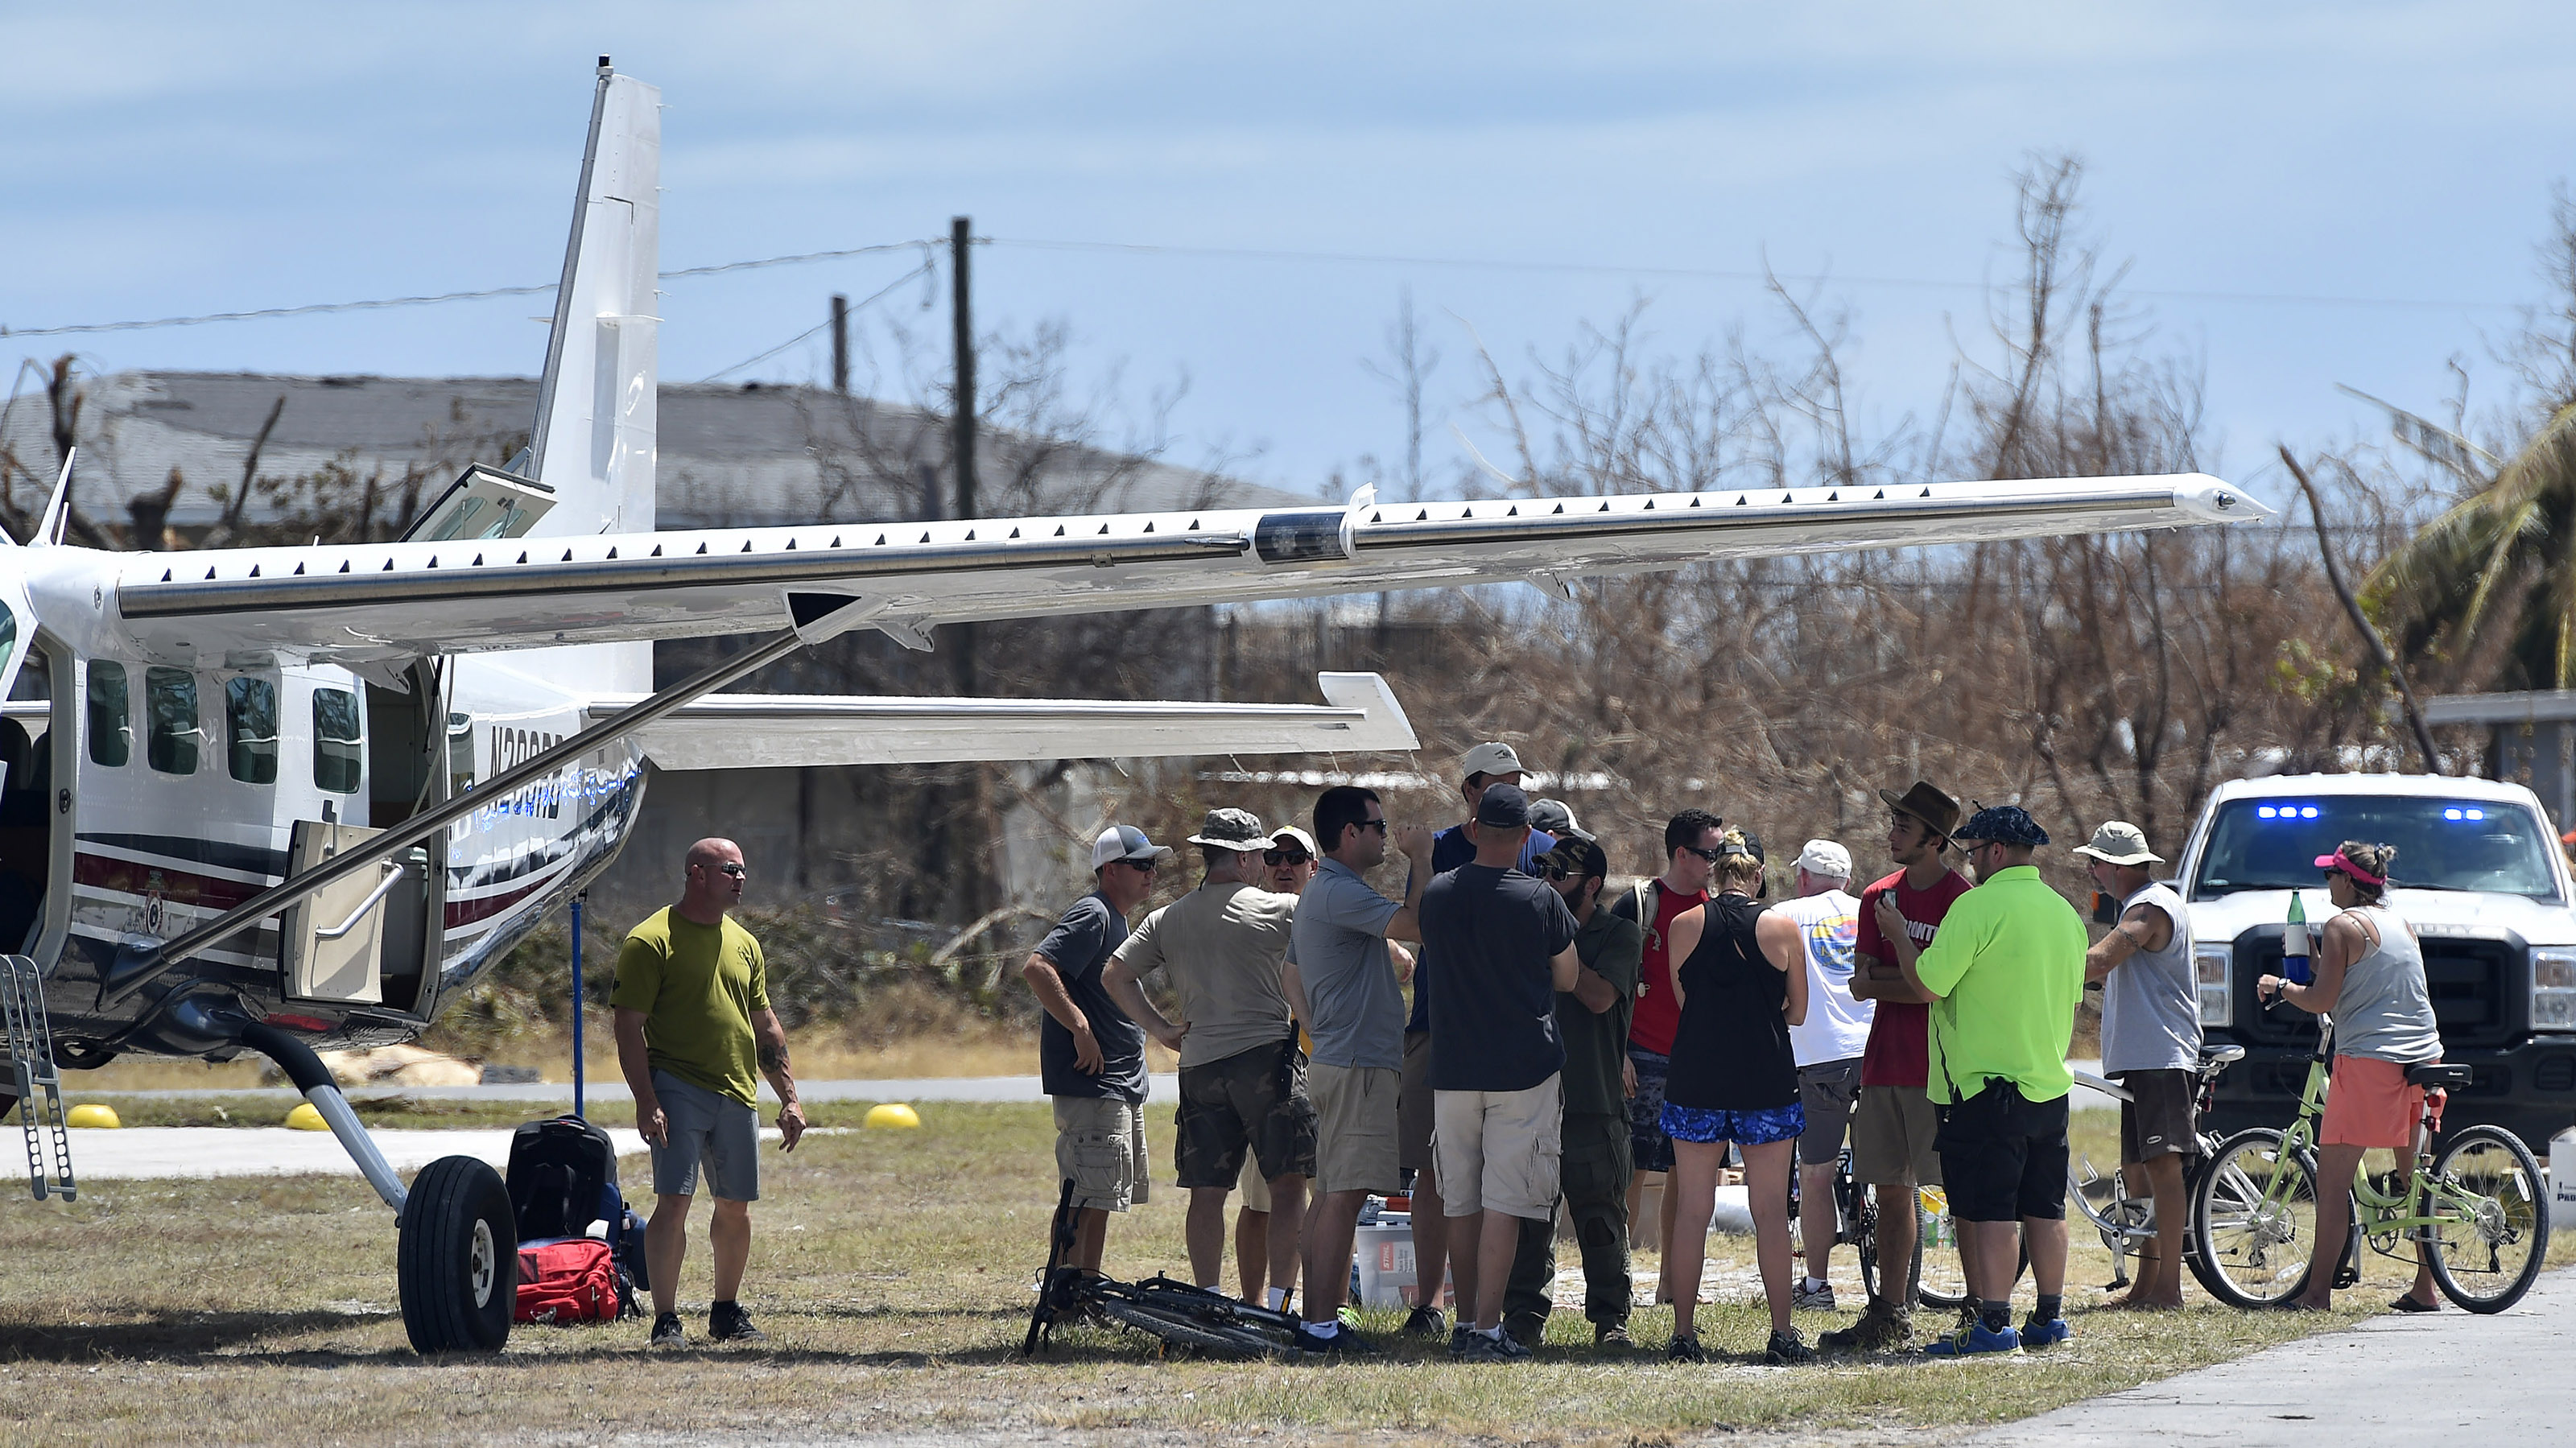 A Cessna Caravan piloted by AERObridge's Peter Burwell drops off supplies and picks up evacuees Sept. 15 at Florida's Summerland Key Cove Airport after Hurricane Irma swept over the tiny island airfield. Photo by David Tulis.